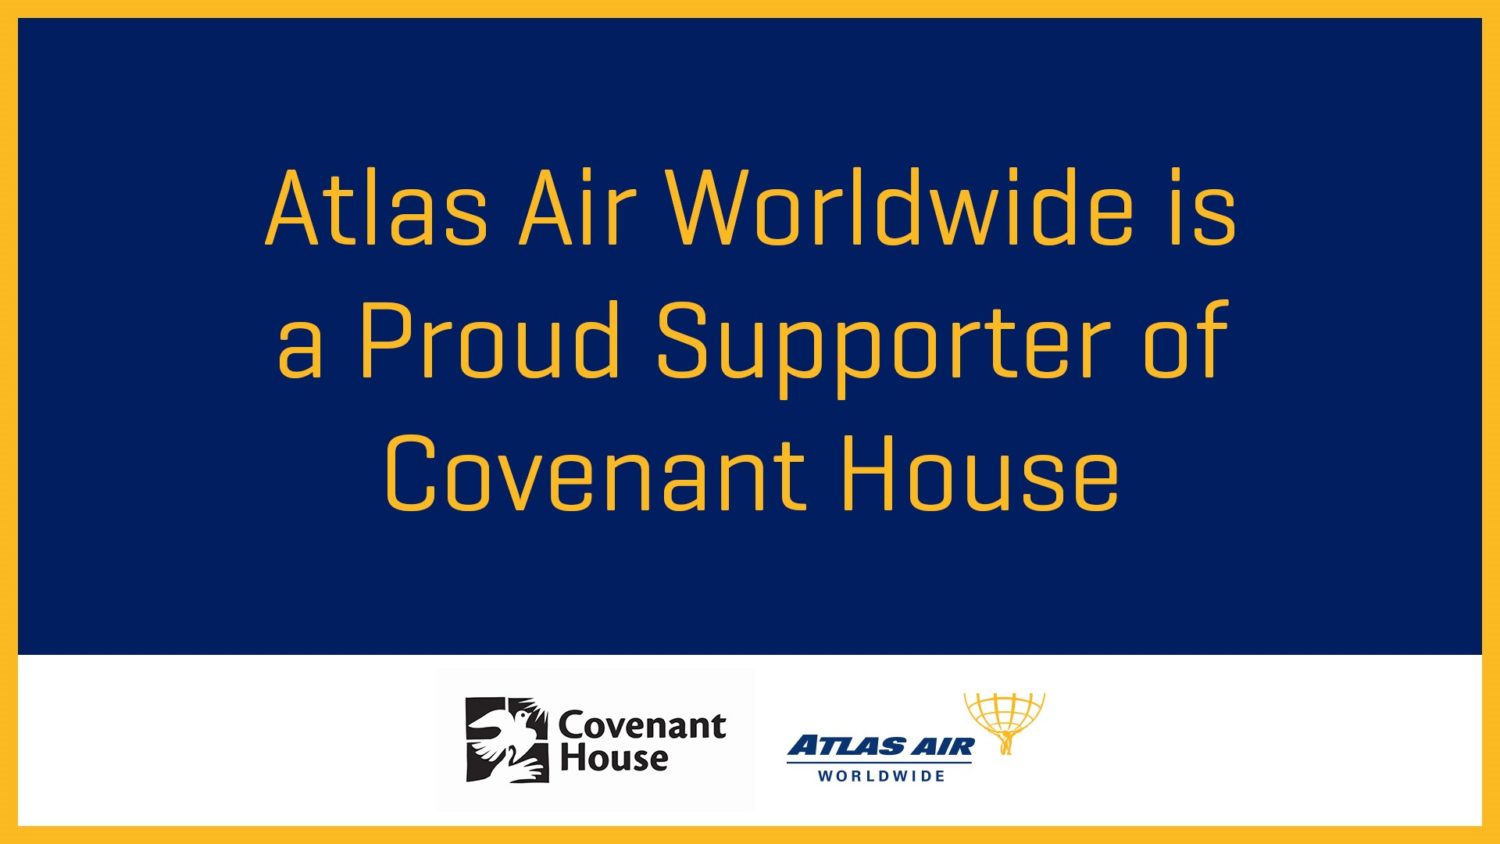 Atlas Steps Up to Help Covenant House Change the Lives of Homeless Youth